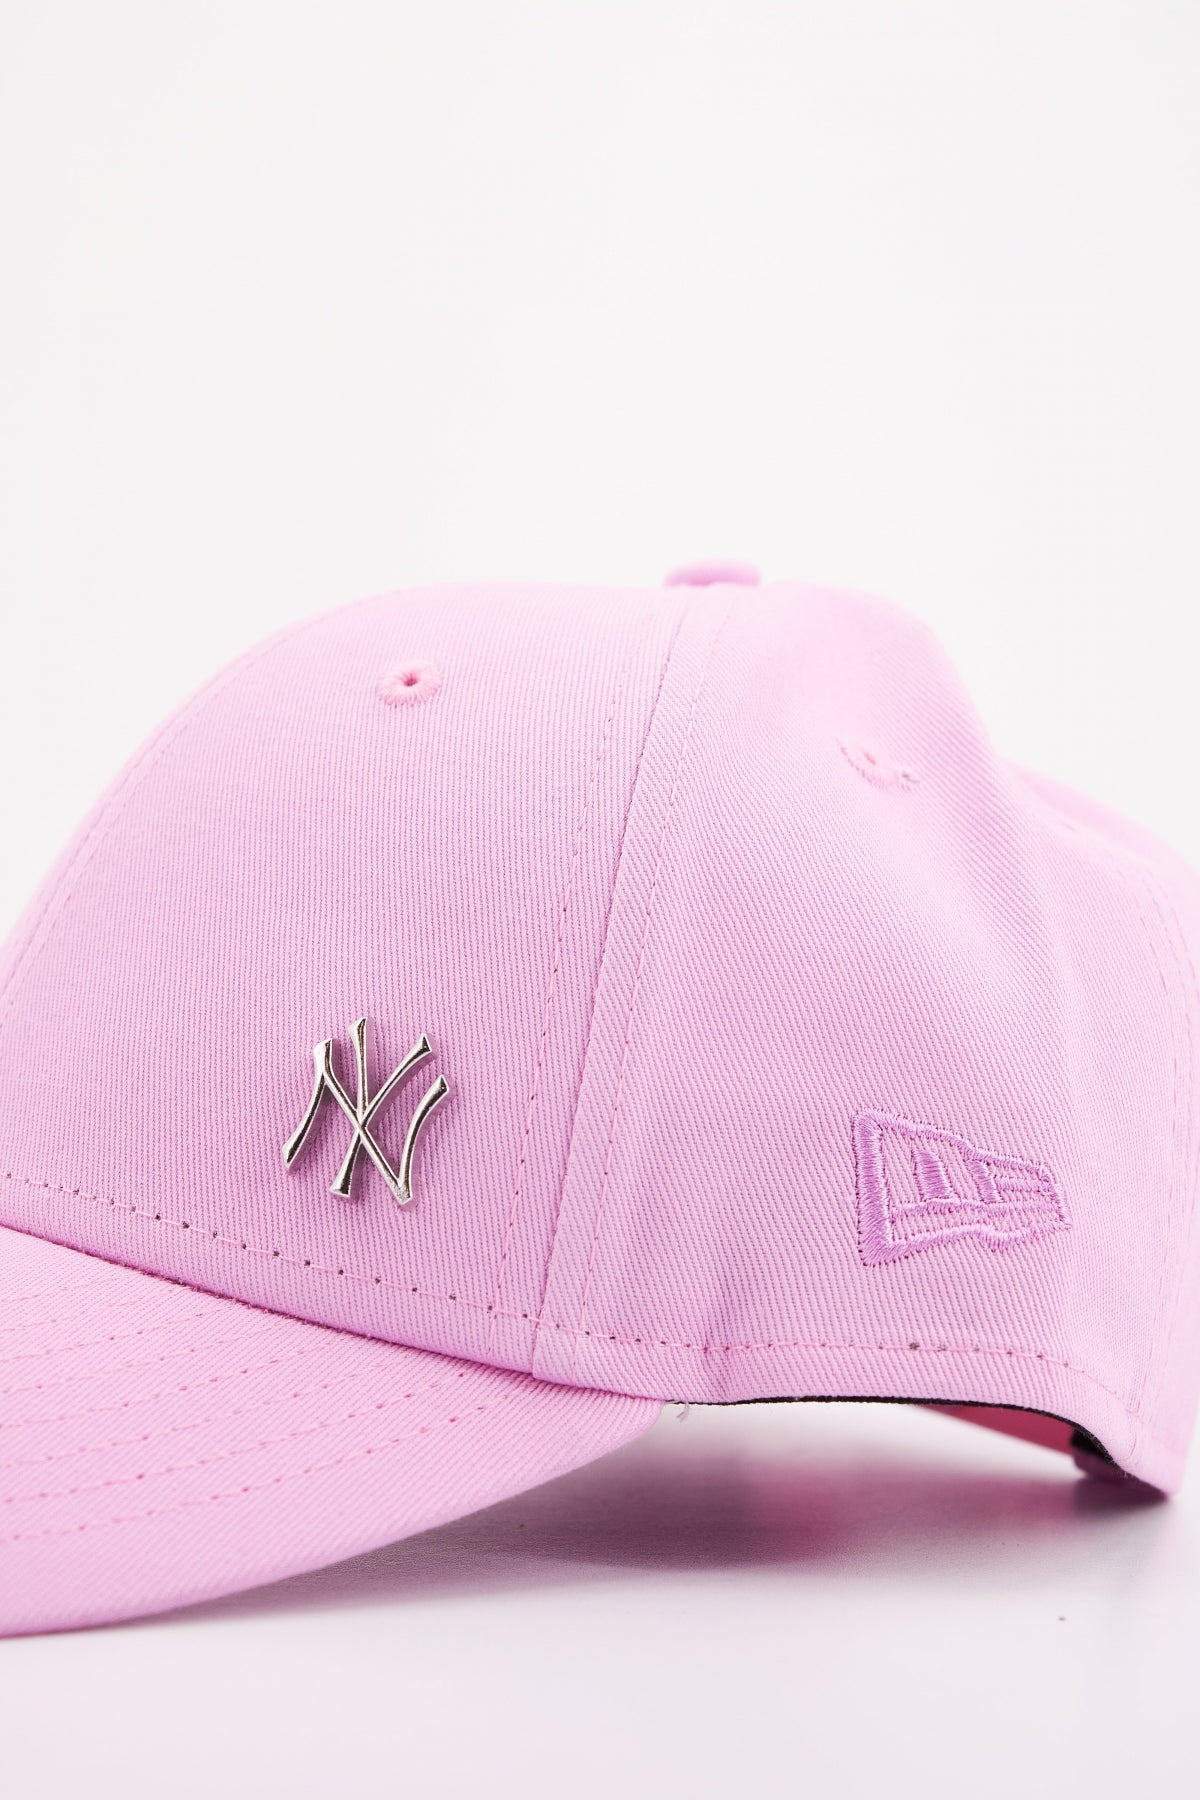 NEW ERA FLAWLESS FORTY en color ROSA  (4)